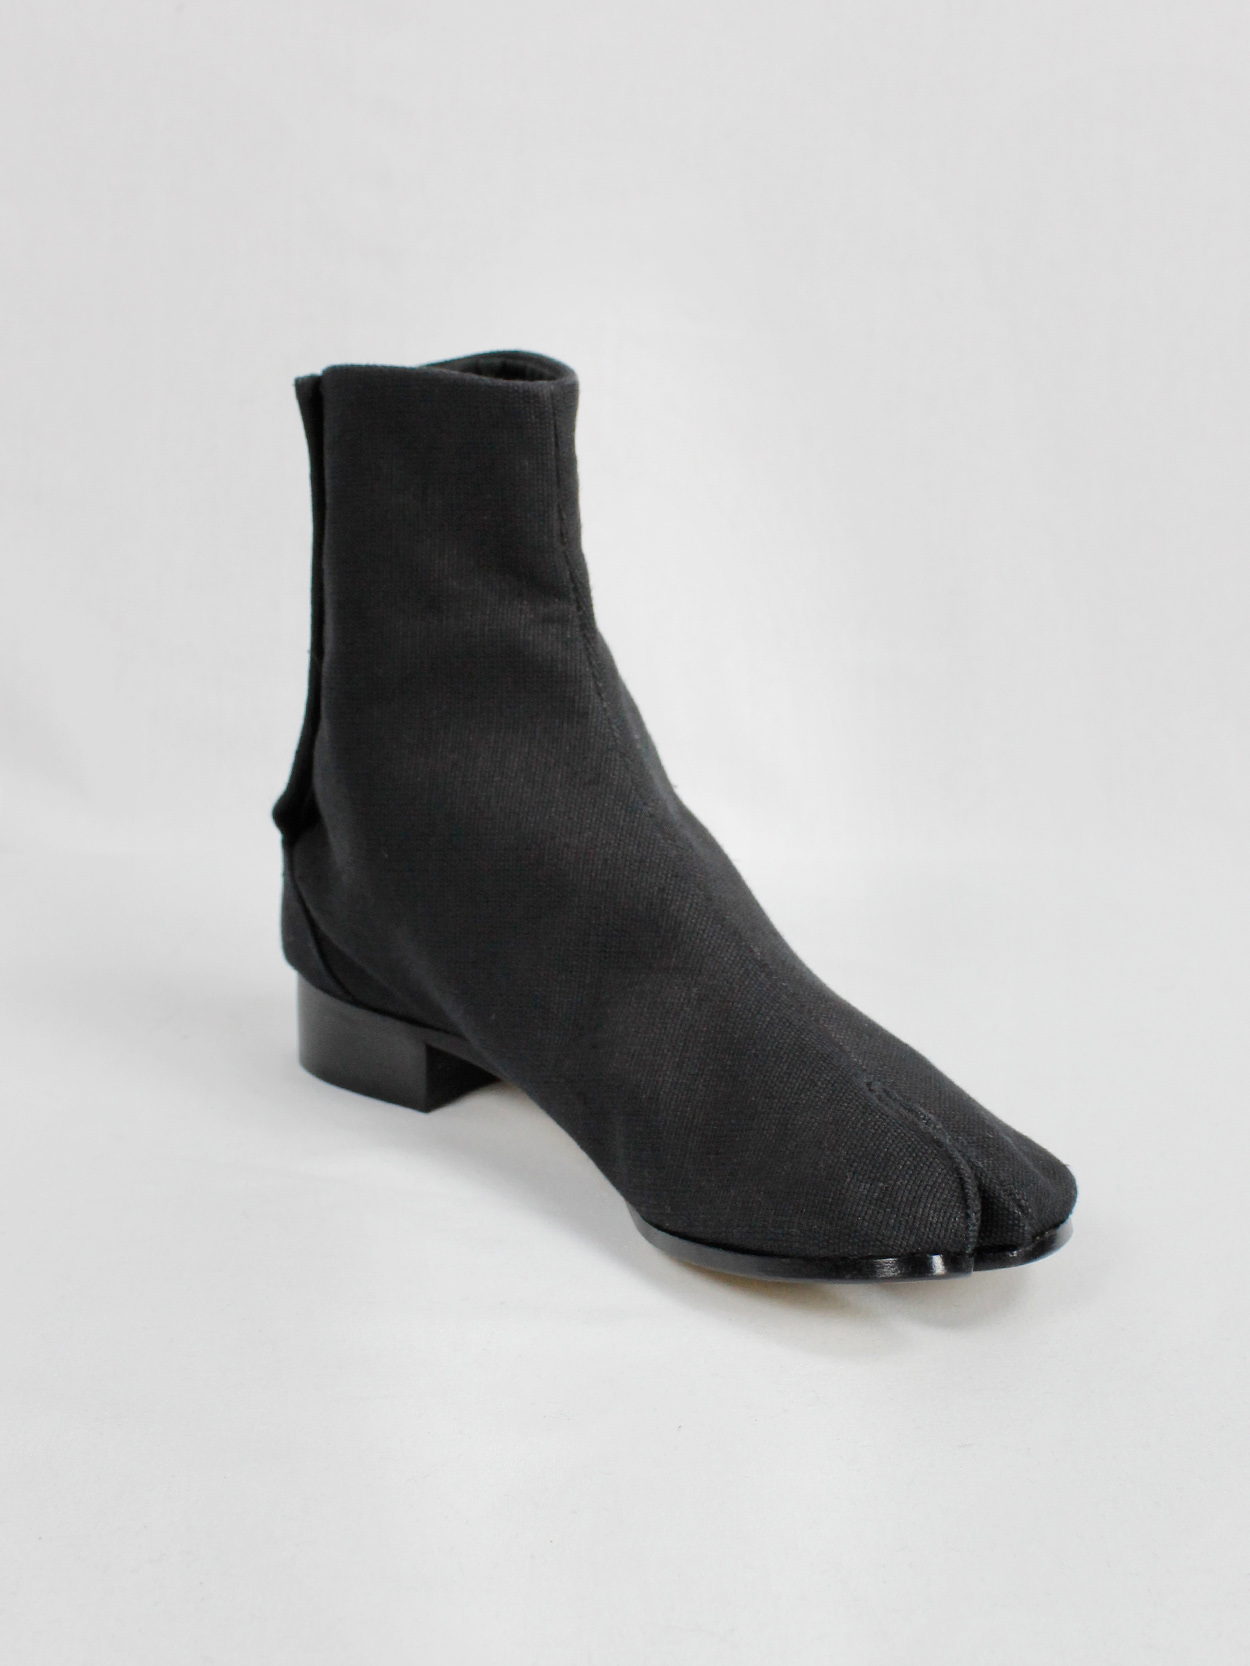 Maison Martin Margiela black tabi boots in woven fabric with low heel fall 1998 (1)